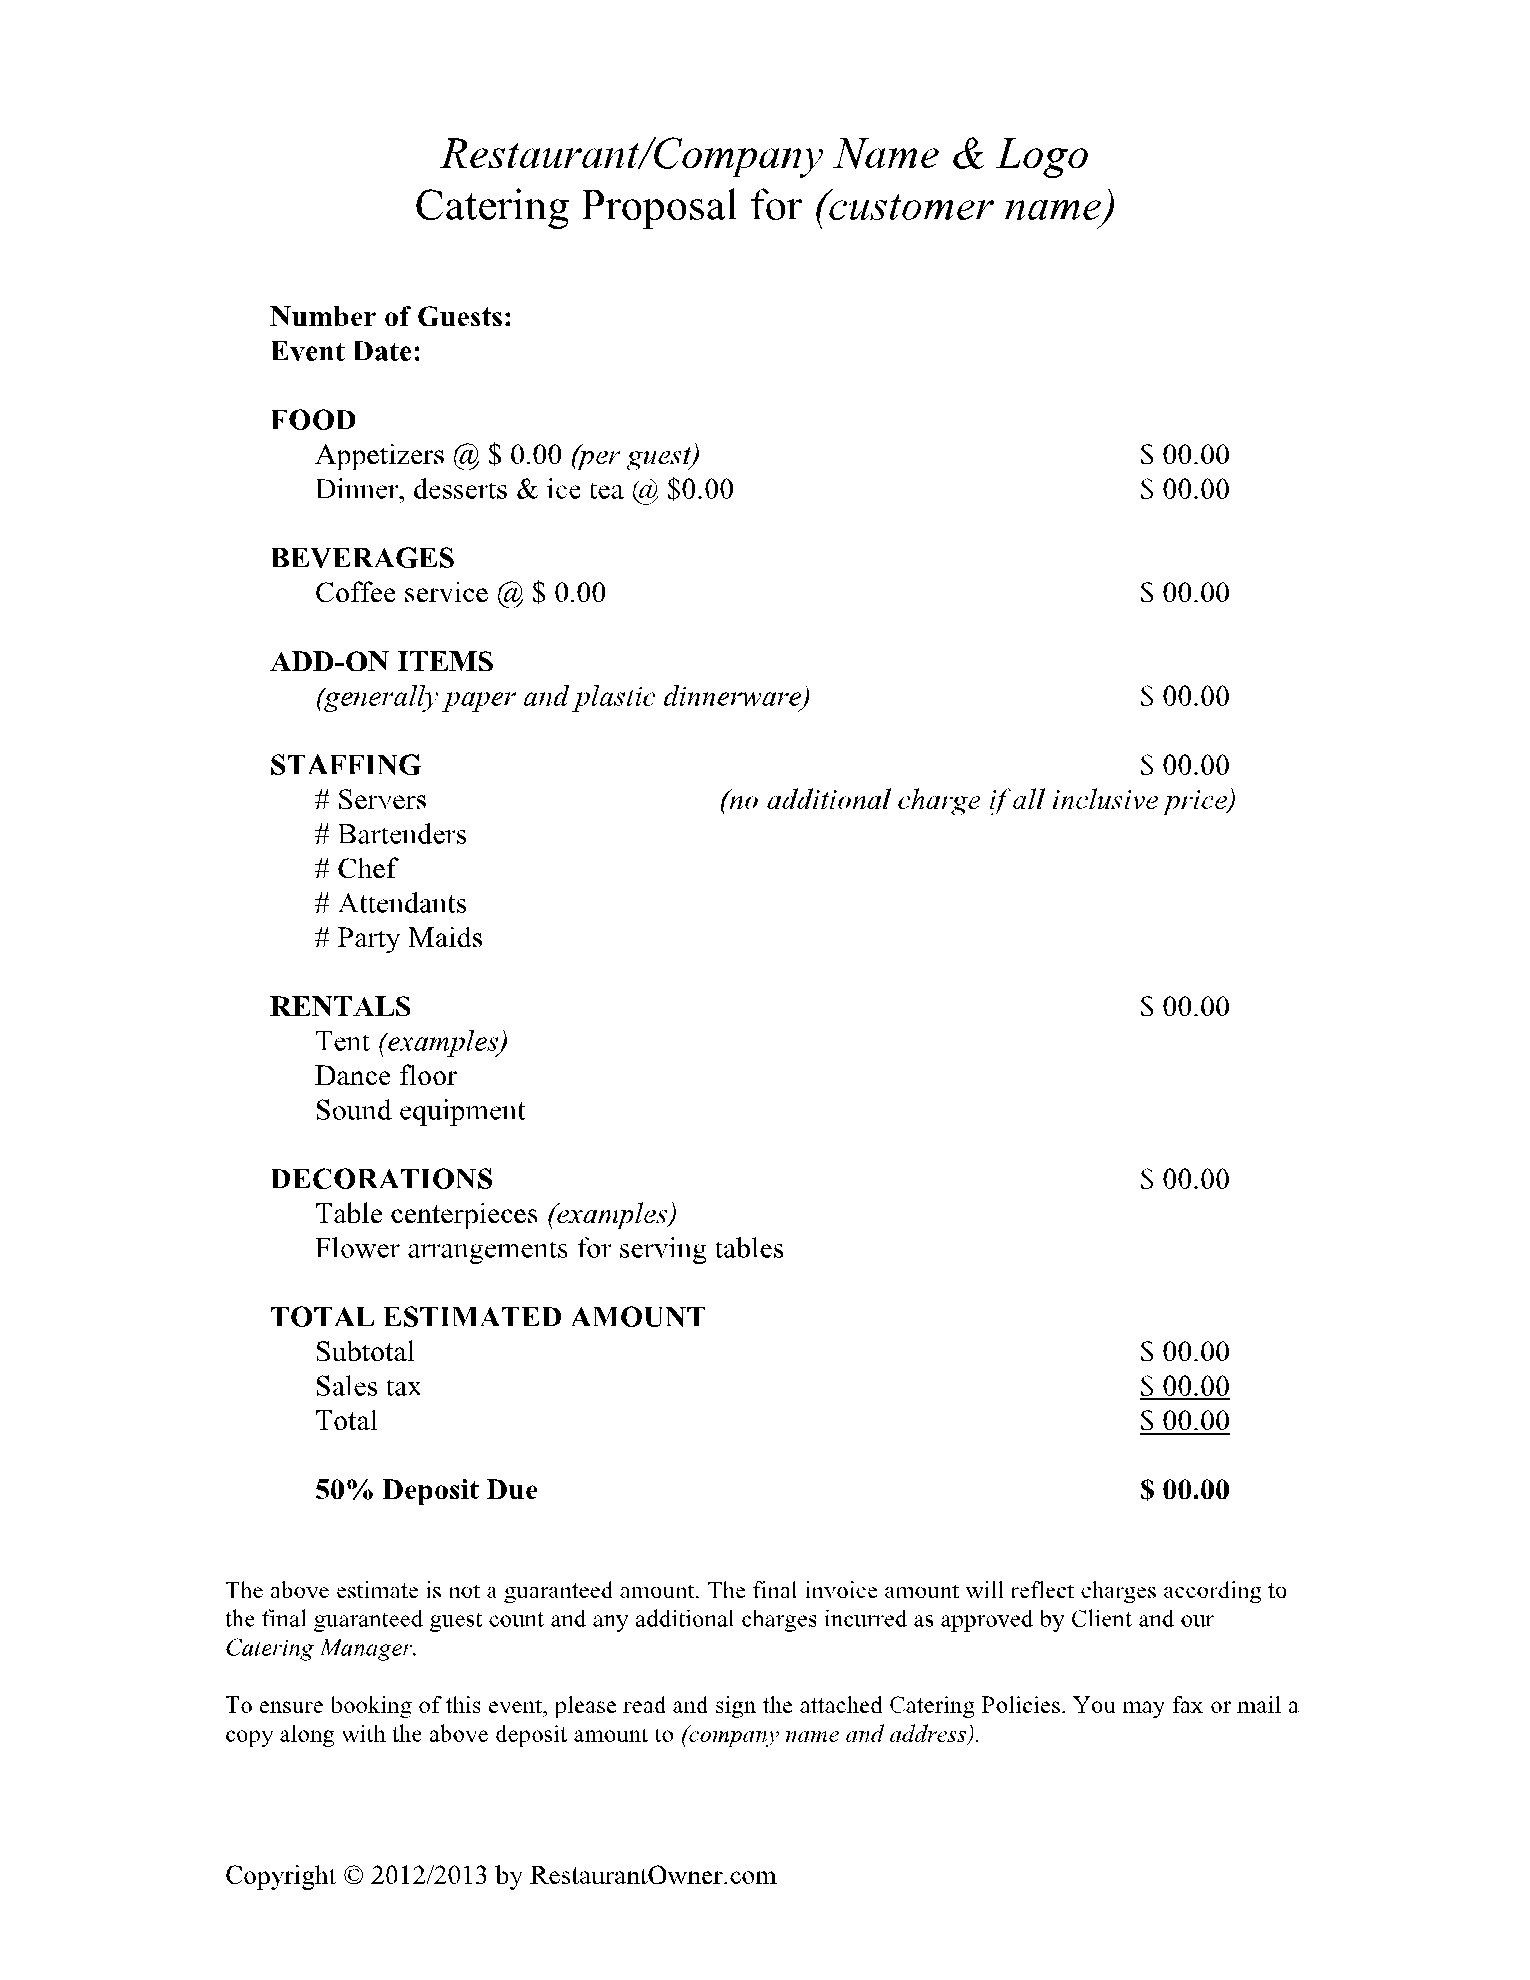 Catering Proposal Template 2